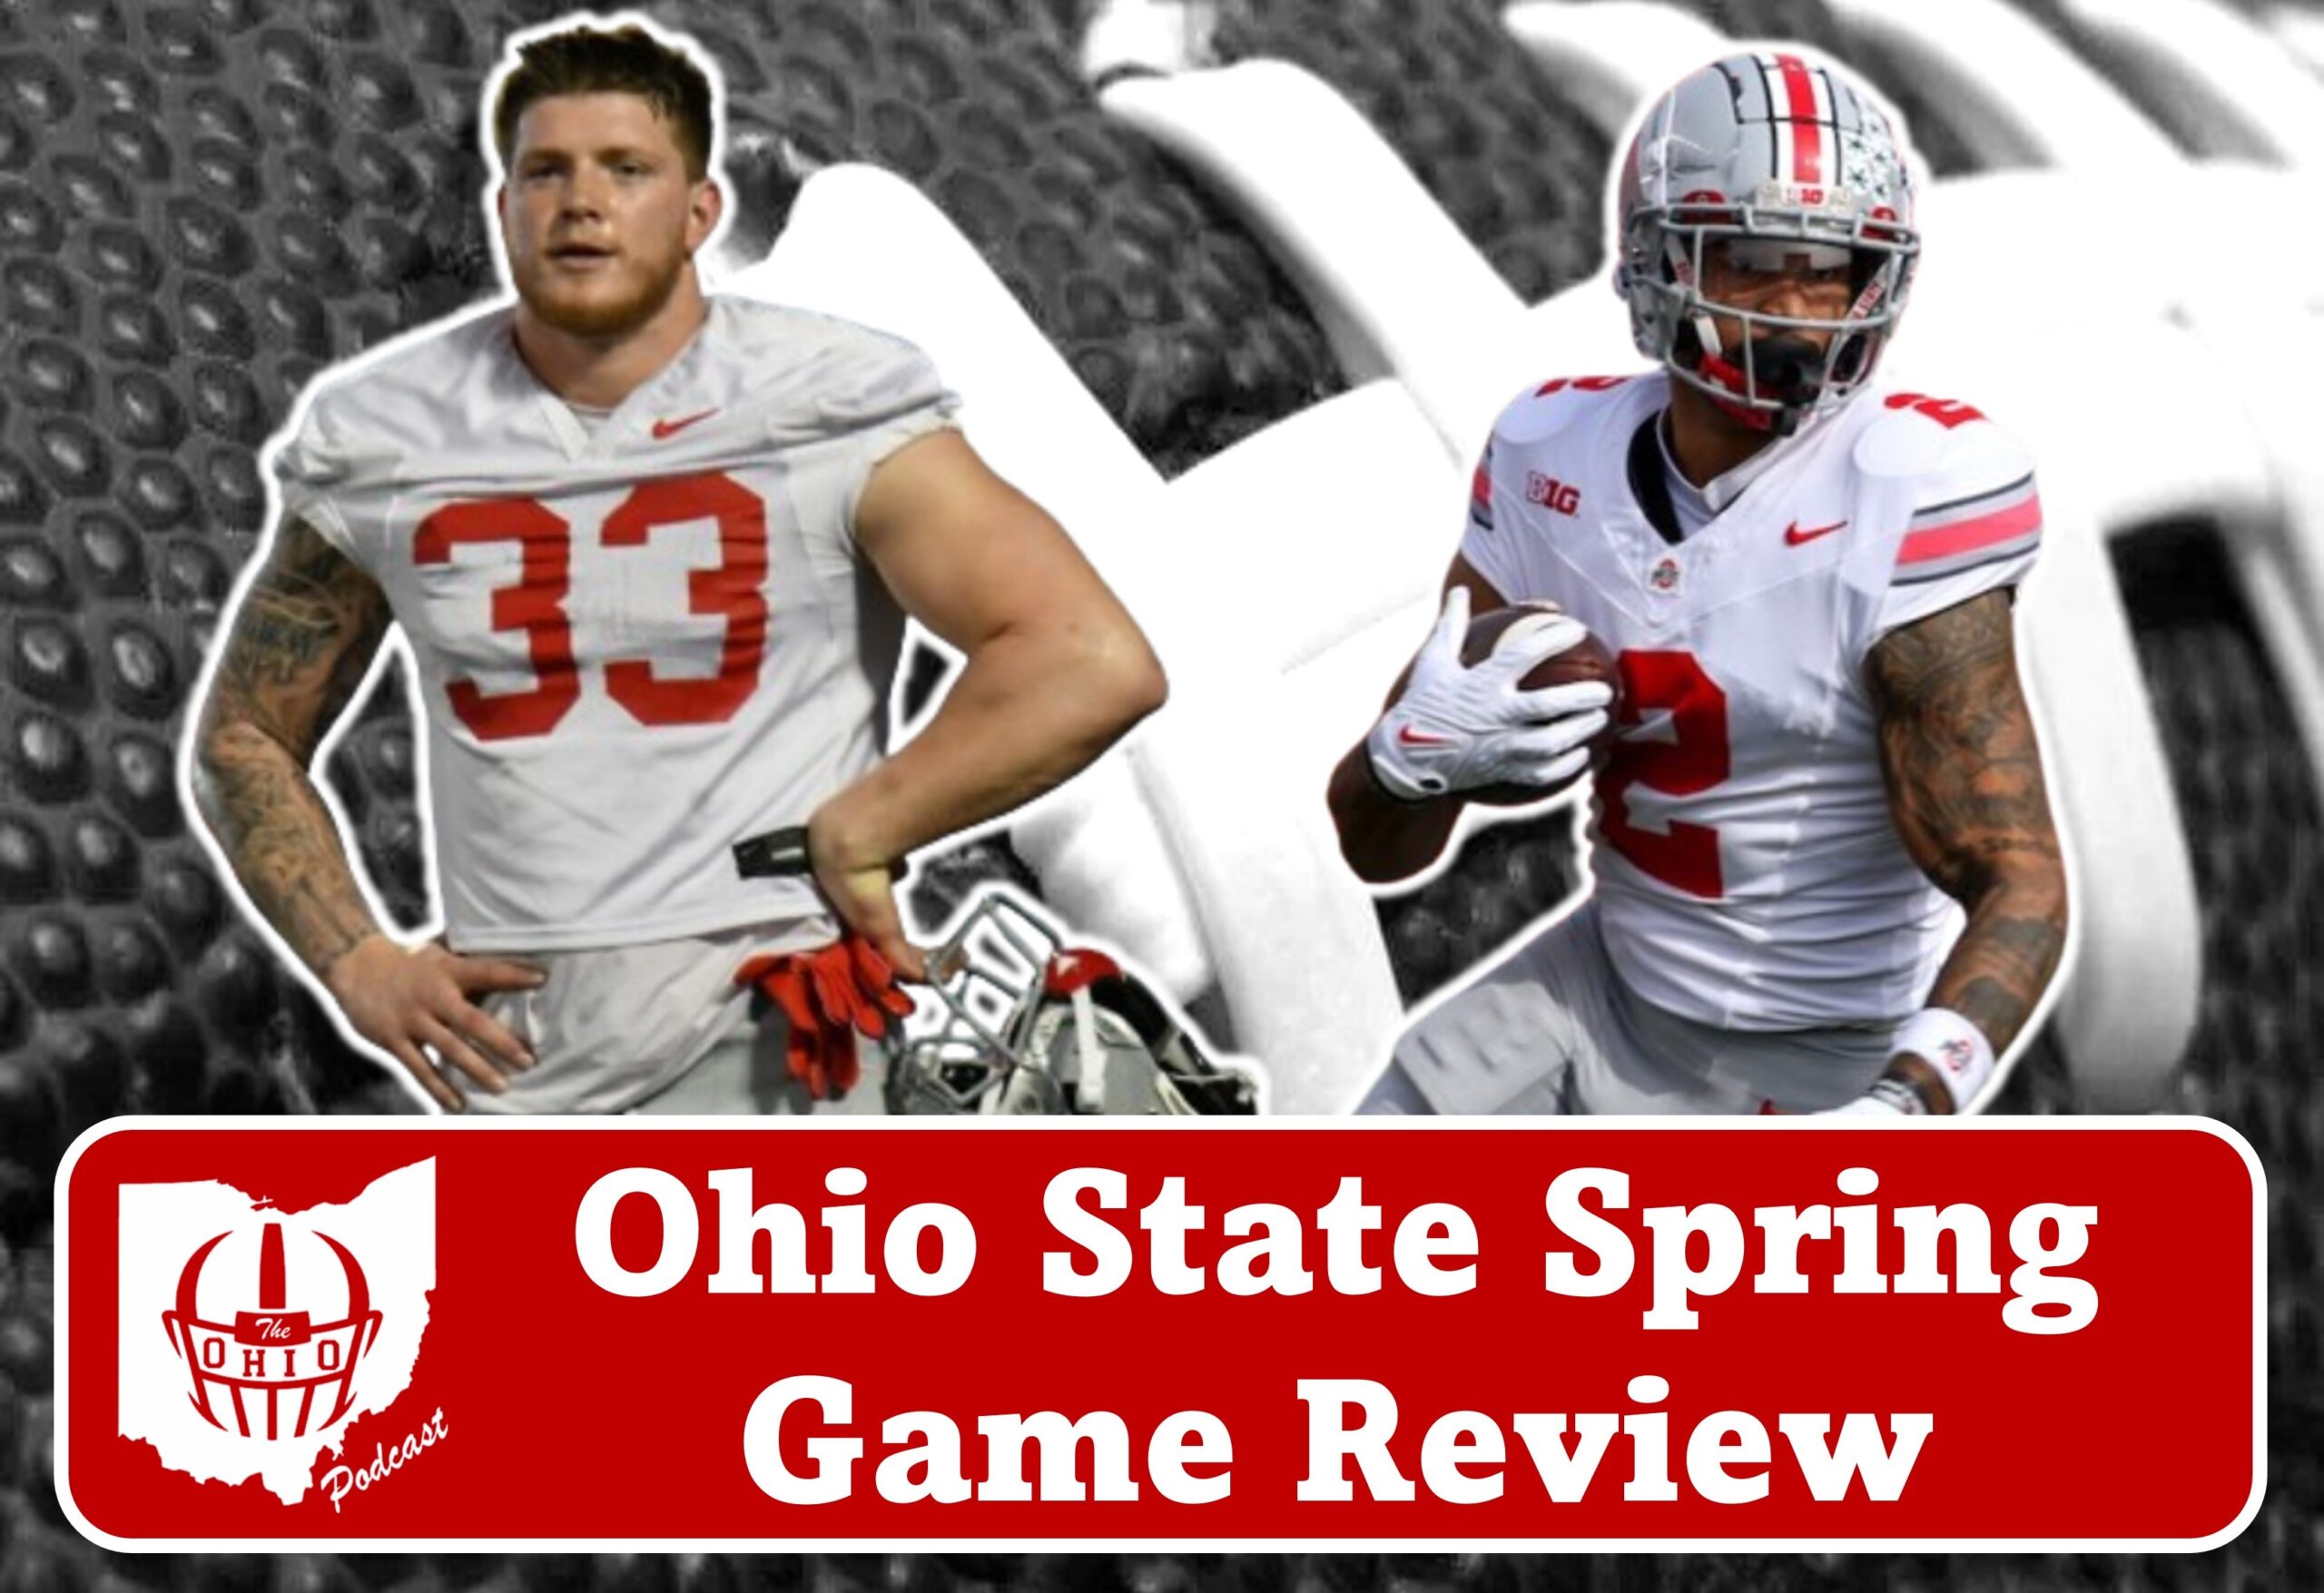 Ohio State Spring Game Review